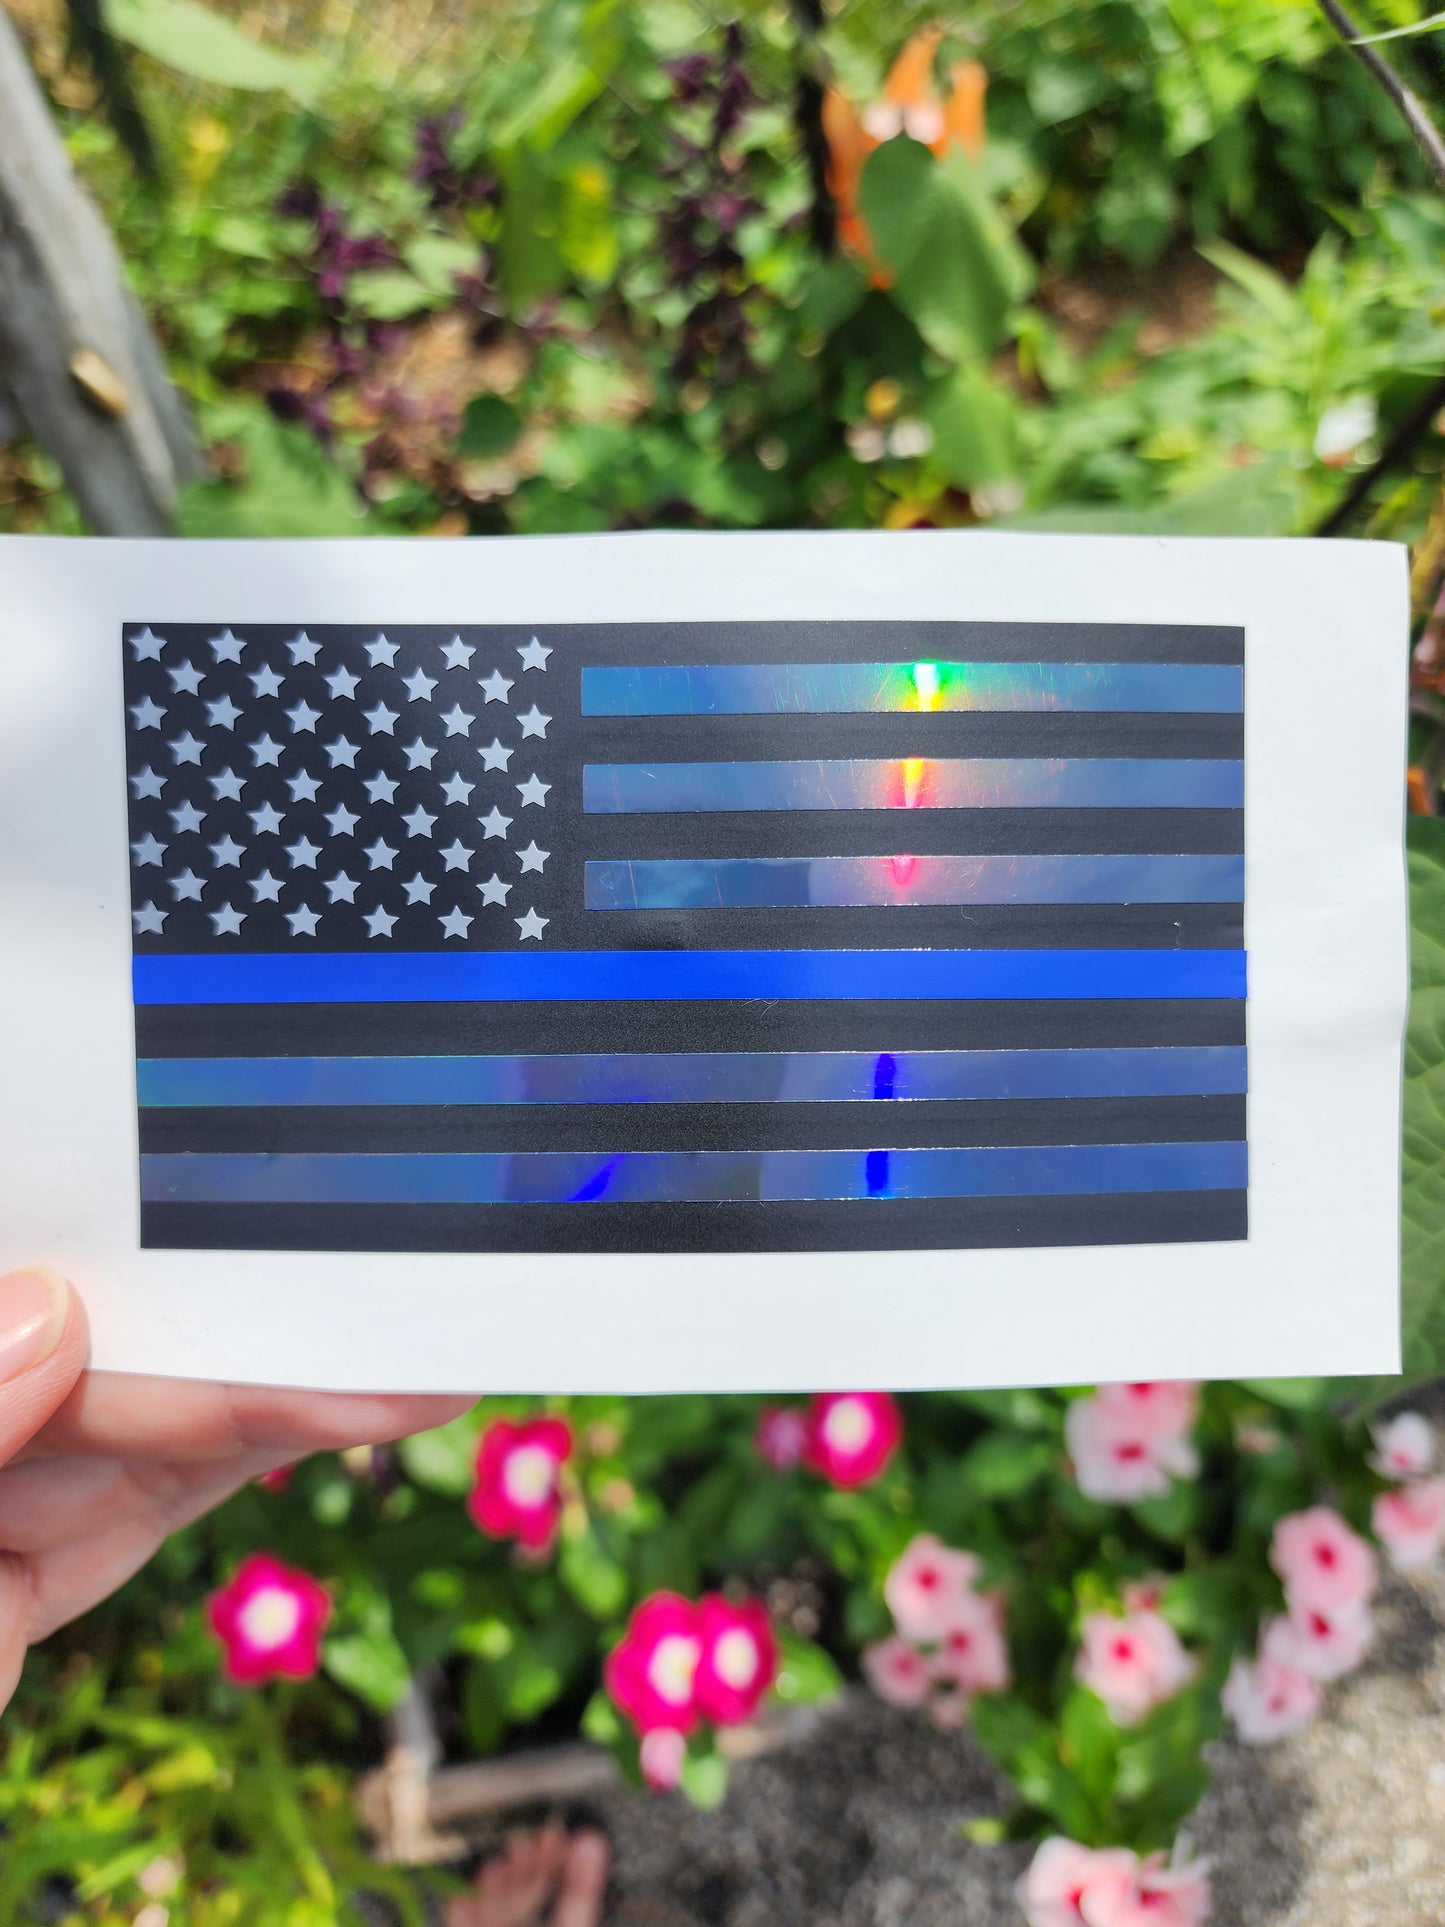 Police Support. Flag style "Thin blue Line". First responder support.